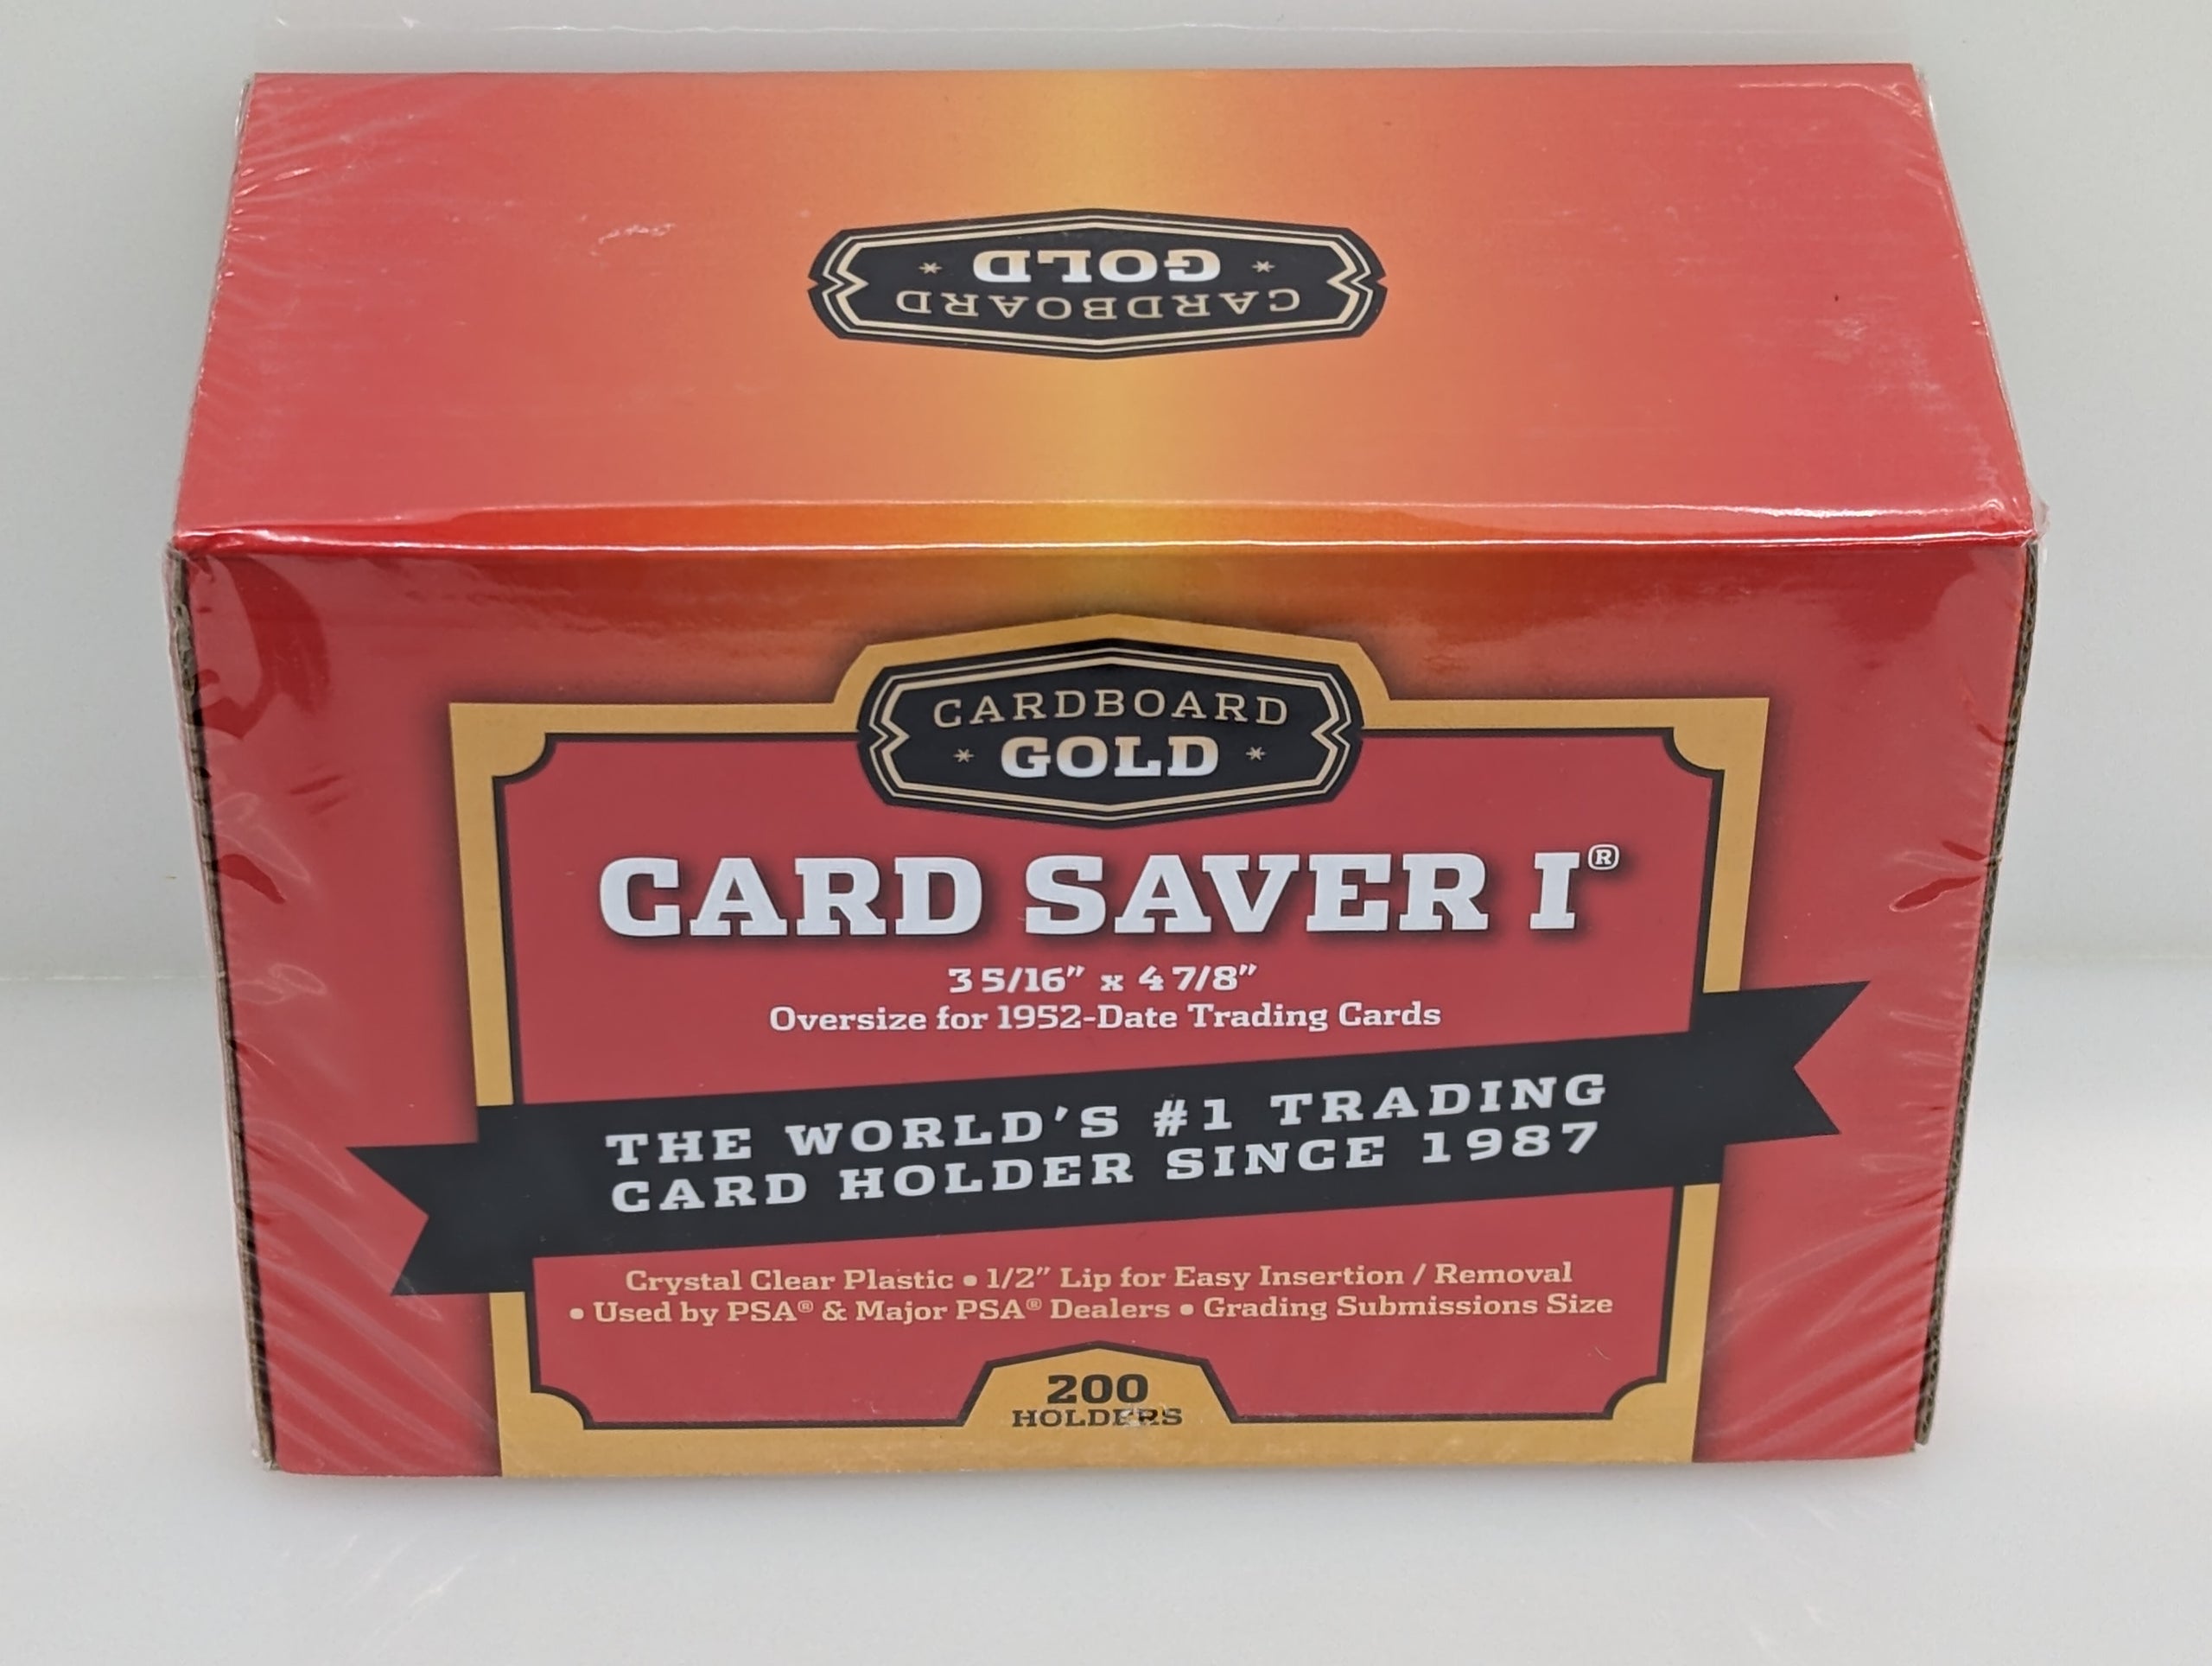 Cardboard Gold Card Saver 1 - 250 Count - In Hand - Brand New